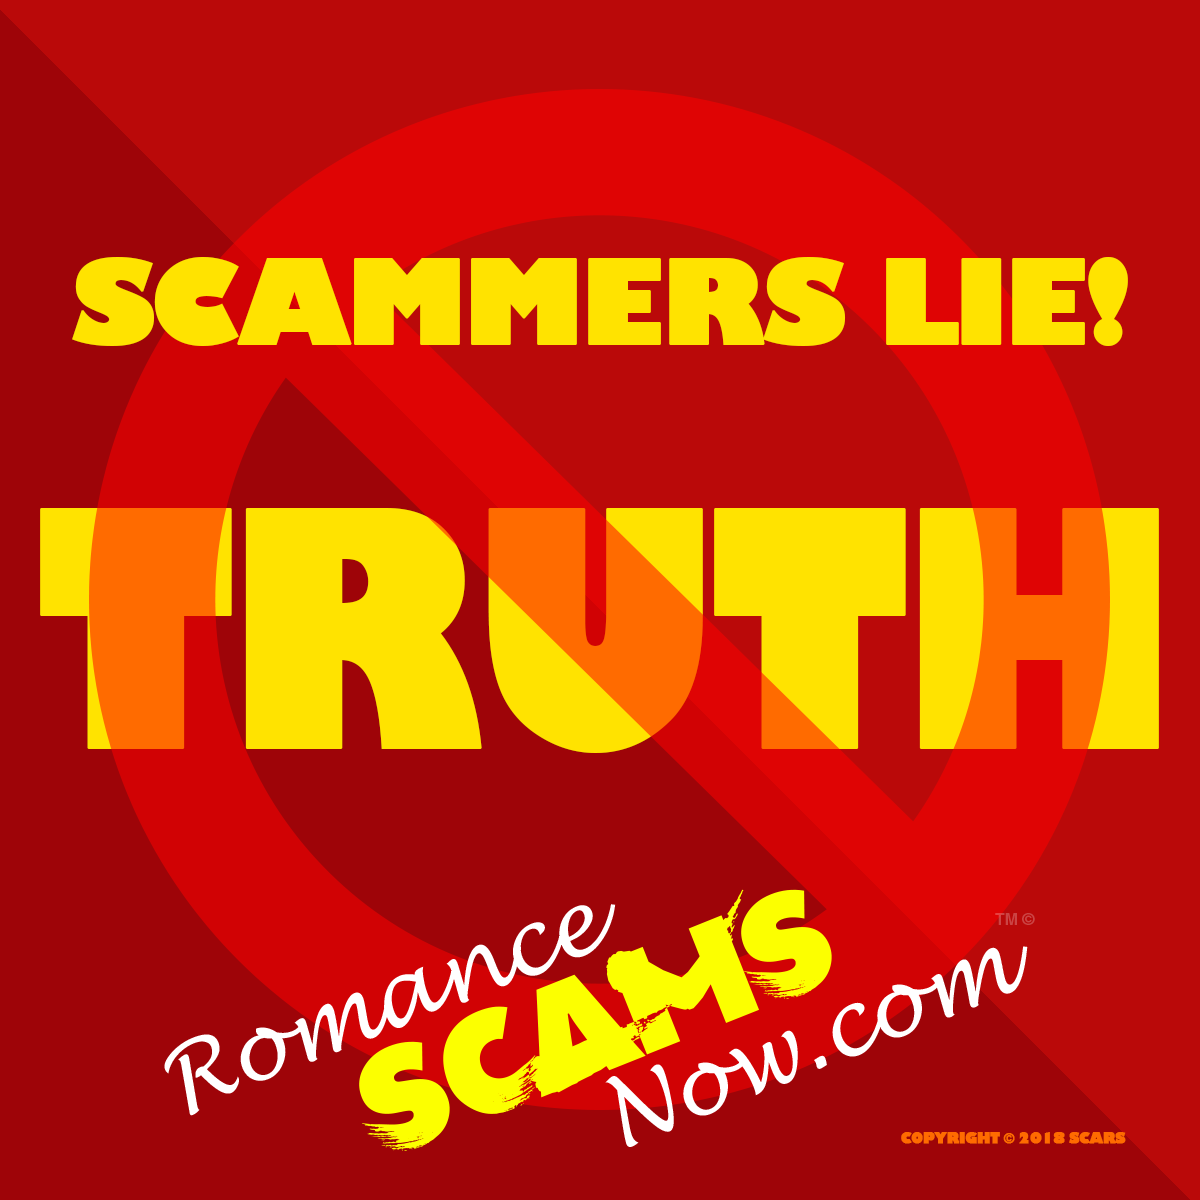 SCARS ™ / RSN™ Anti-Scam Poster 163